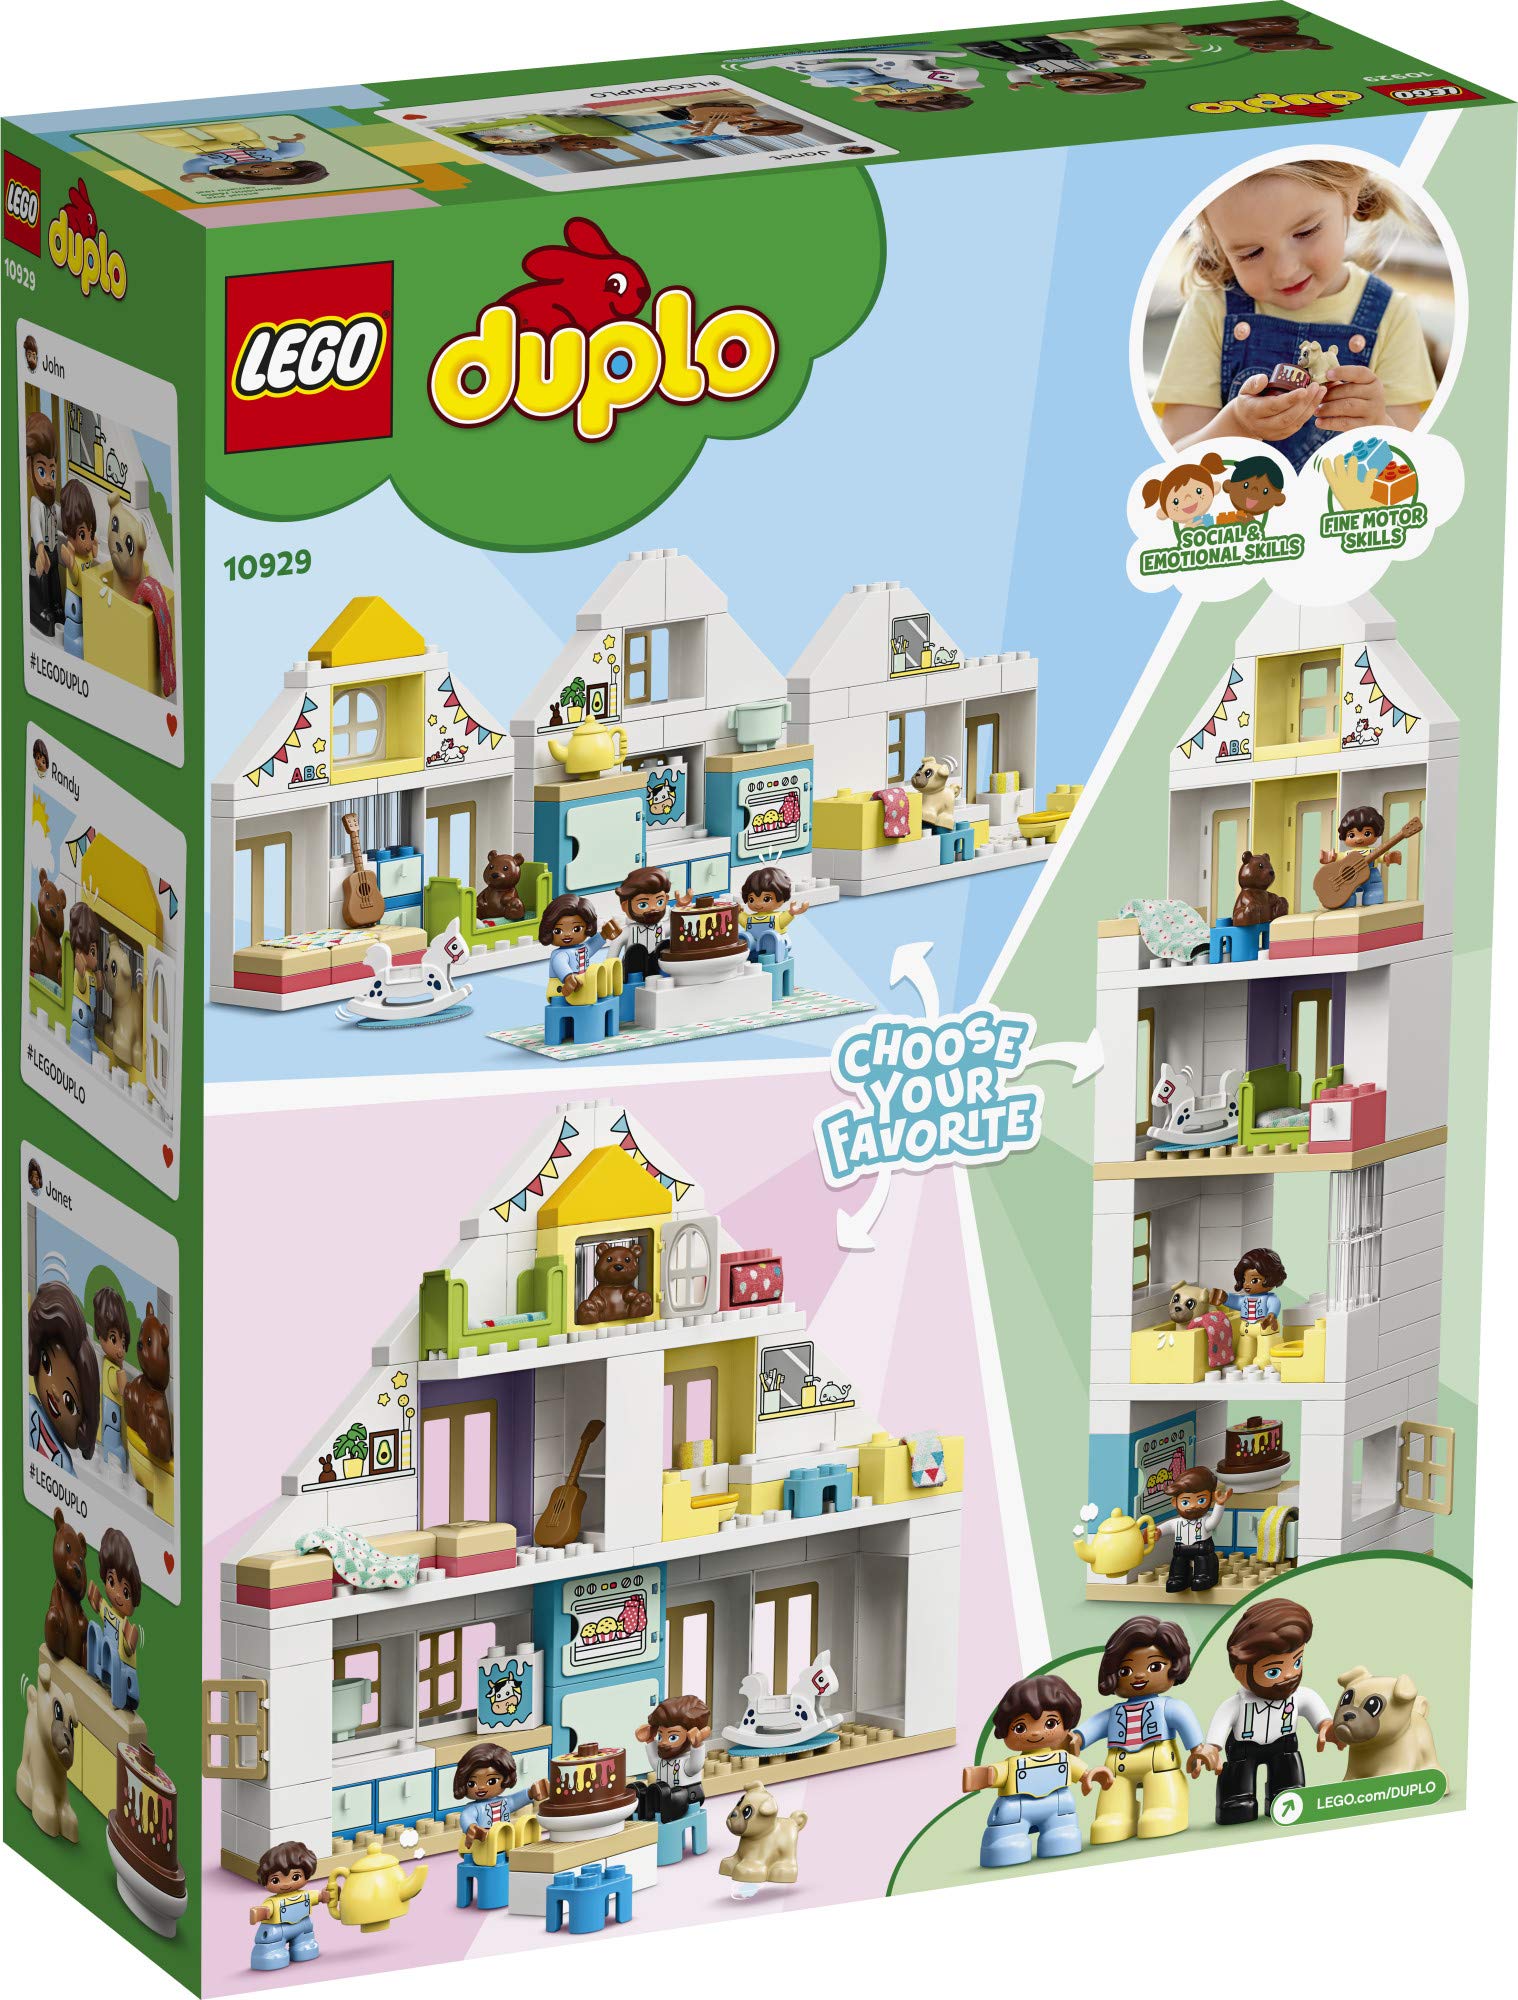 LEGO DUPLO Town Modular Playhouse 10929 Dollhouse with Furniture and a Family, Great Educational Toy for Toddlers (130 Pieces)